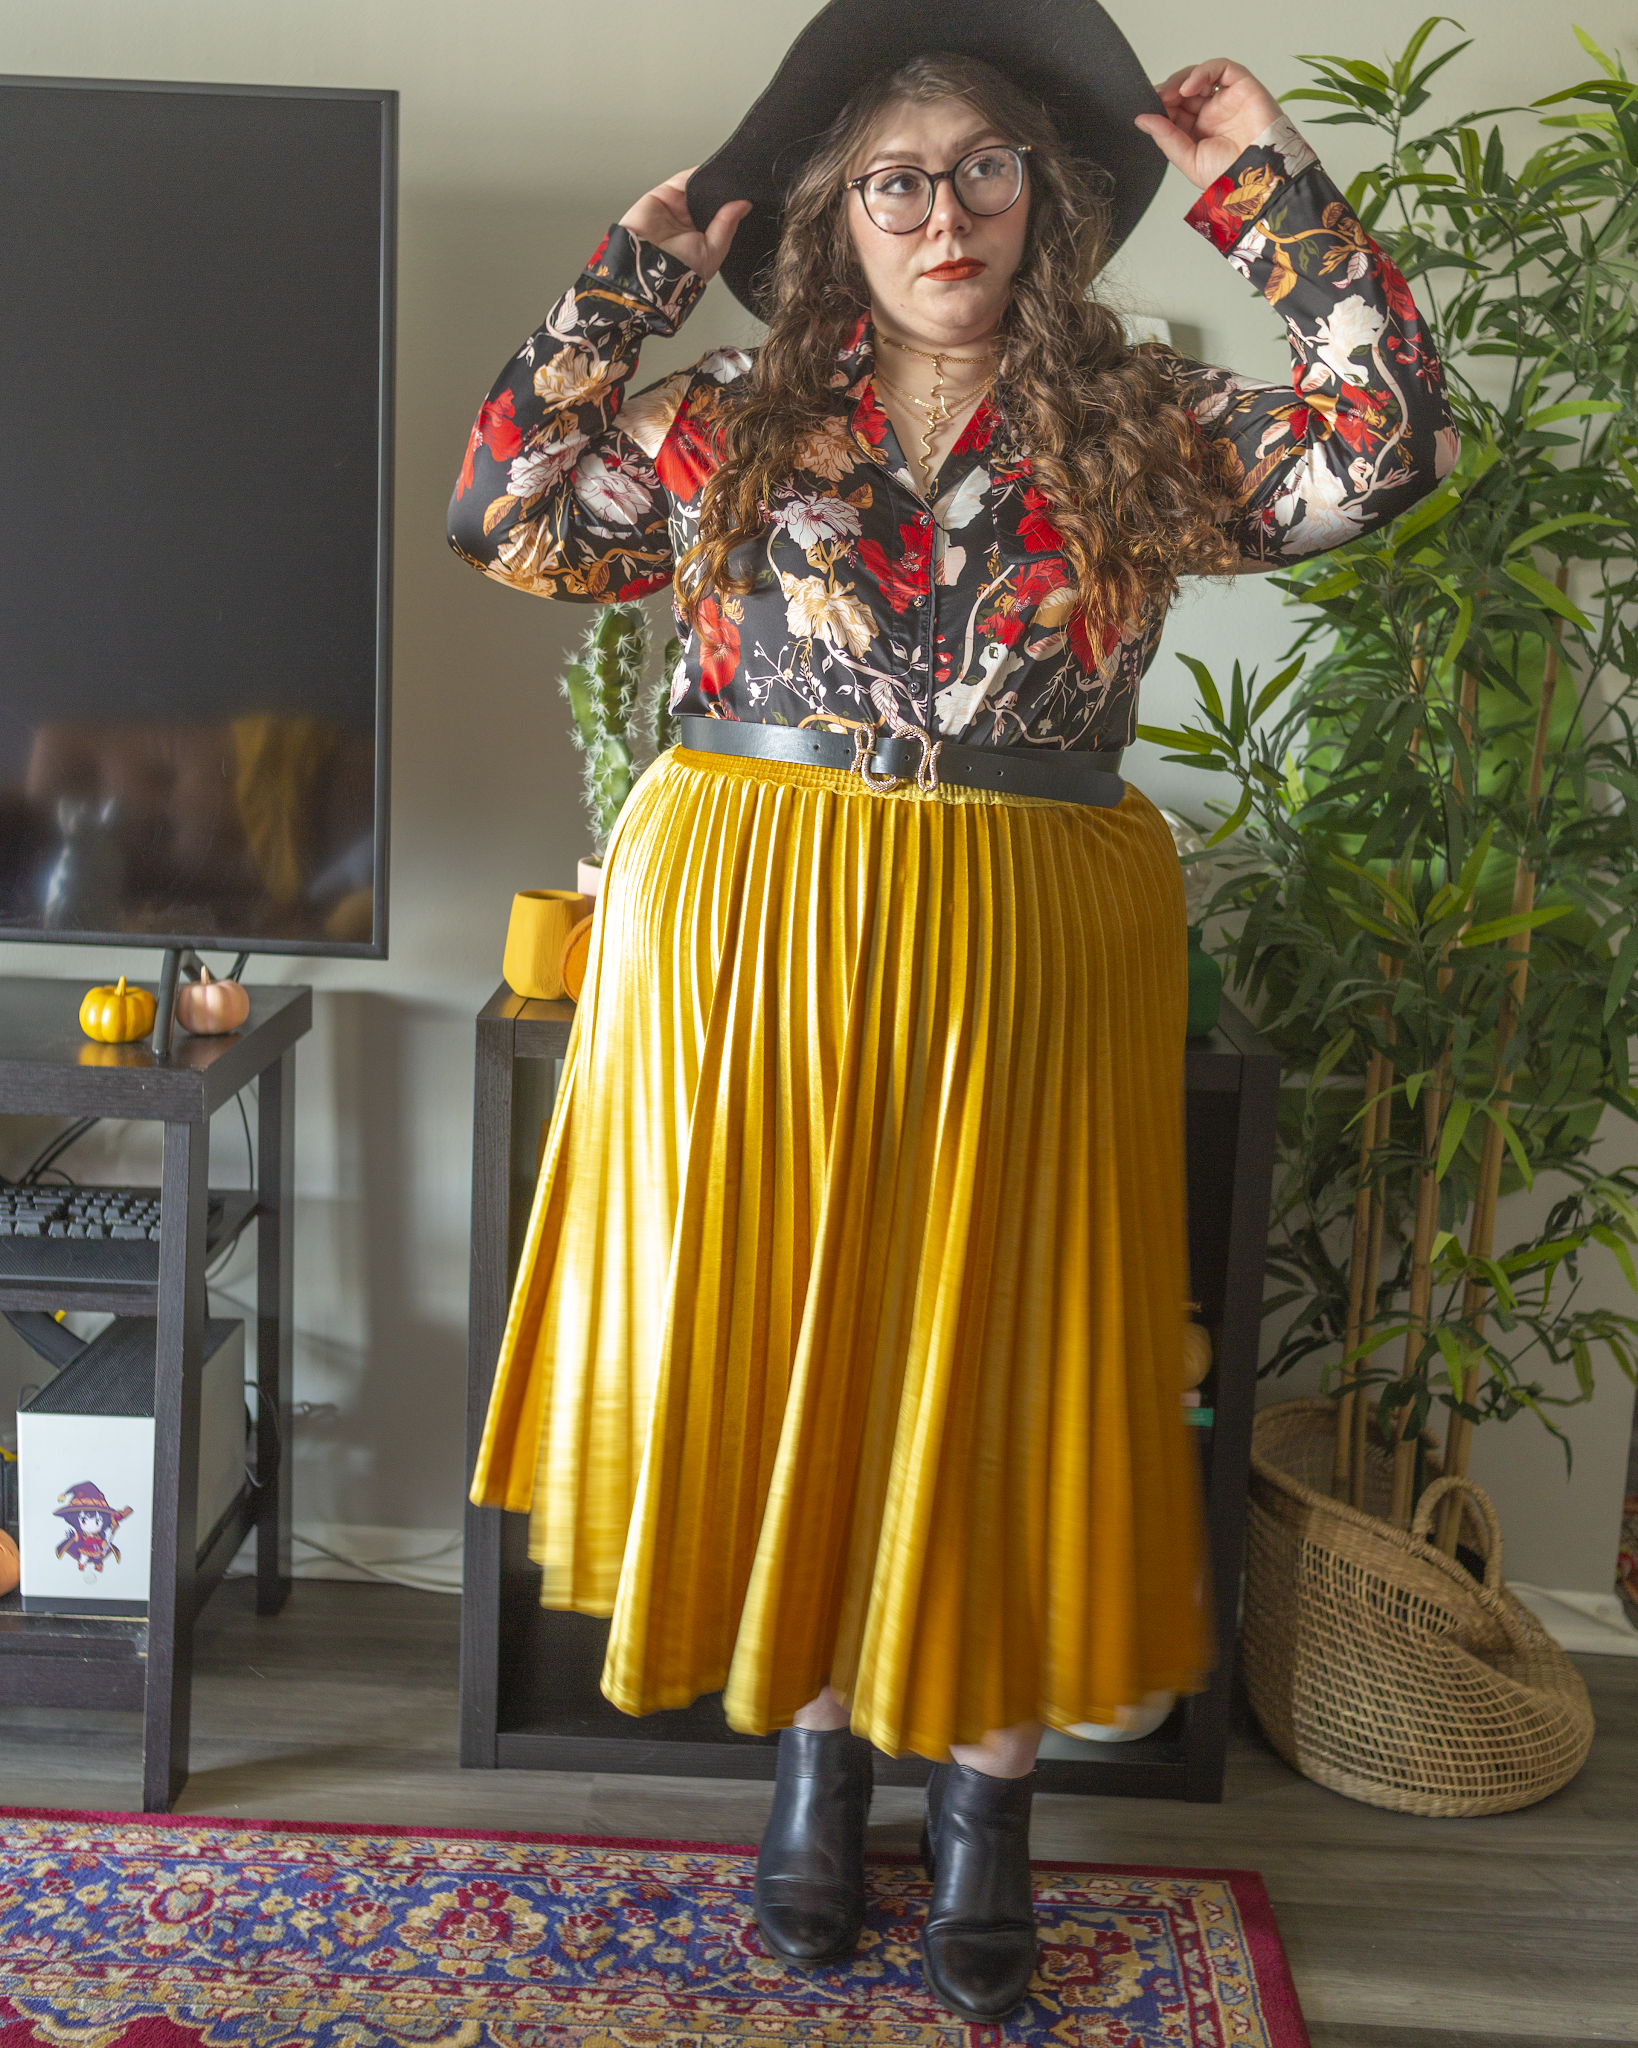 An outfit consisting of a wide brim black floppy hat, a black satin pajama style blouse with dark red, pastel pink, mustard yellow, and cream florals, tucked into a velvet mustard yellow midi skirt and black Chelsea boots.